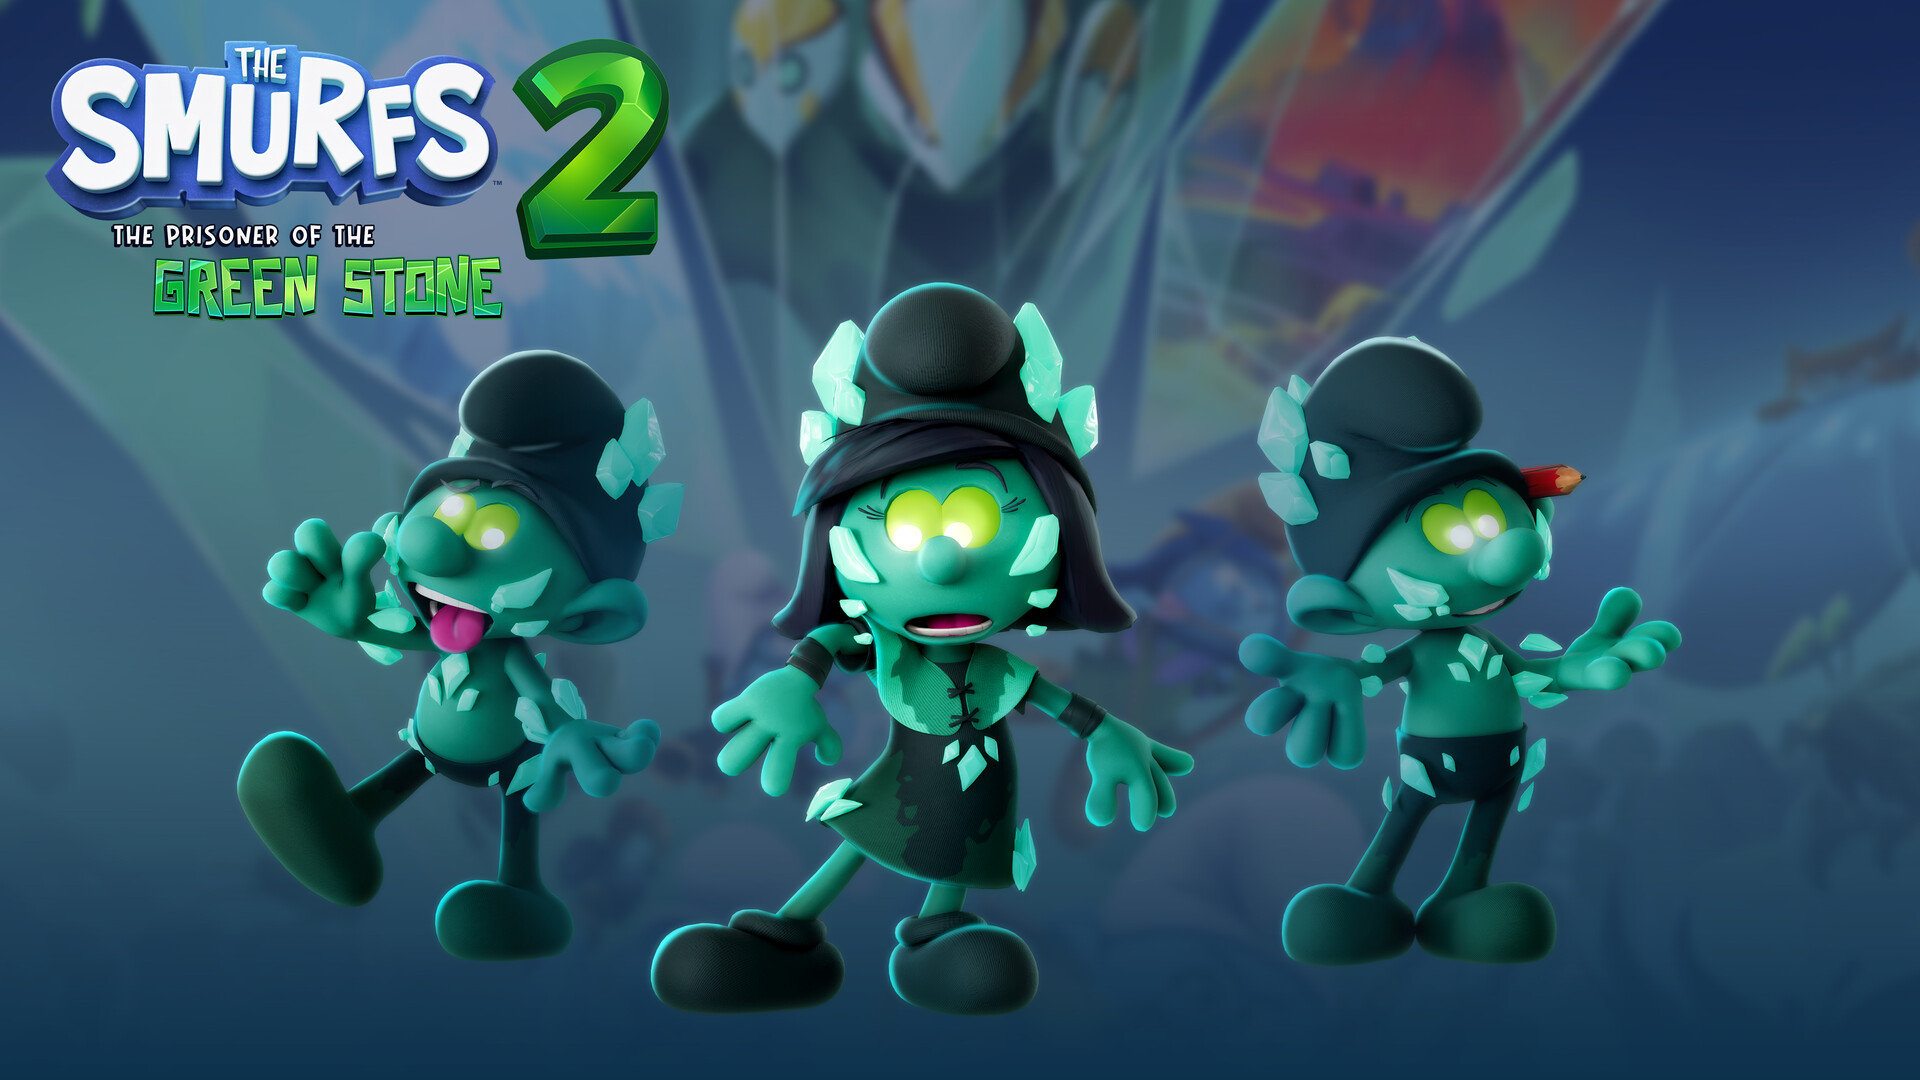 The Smurfs 2: The Prisoner of the Green Stone - Corrupted Outfit DLC GOG CD Key 1.3$